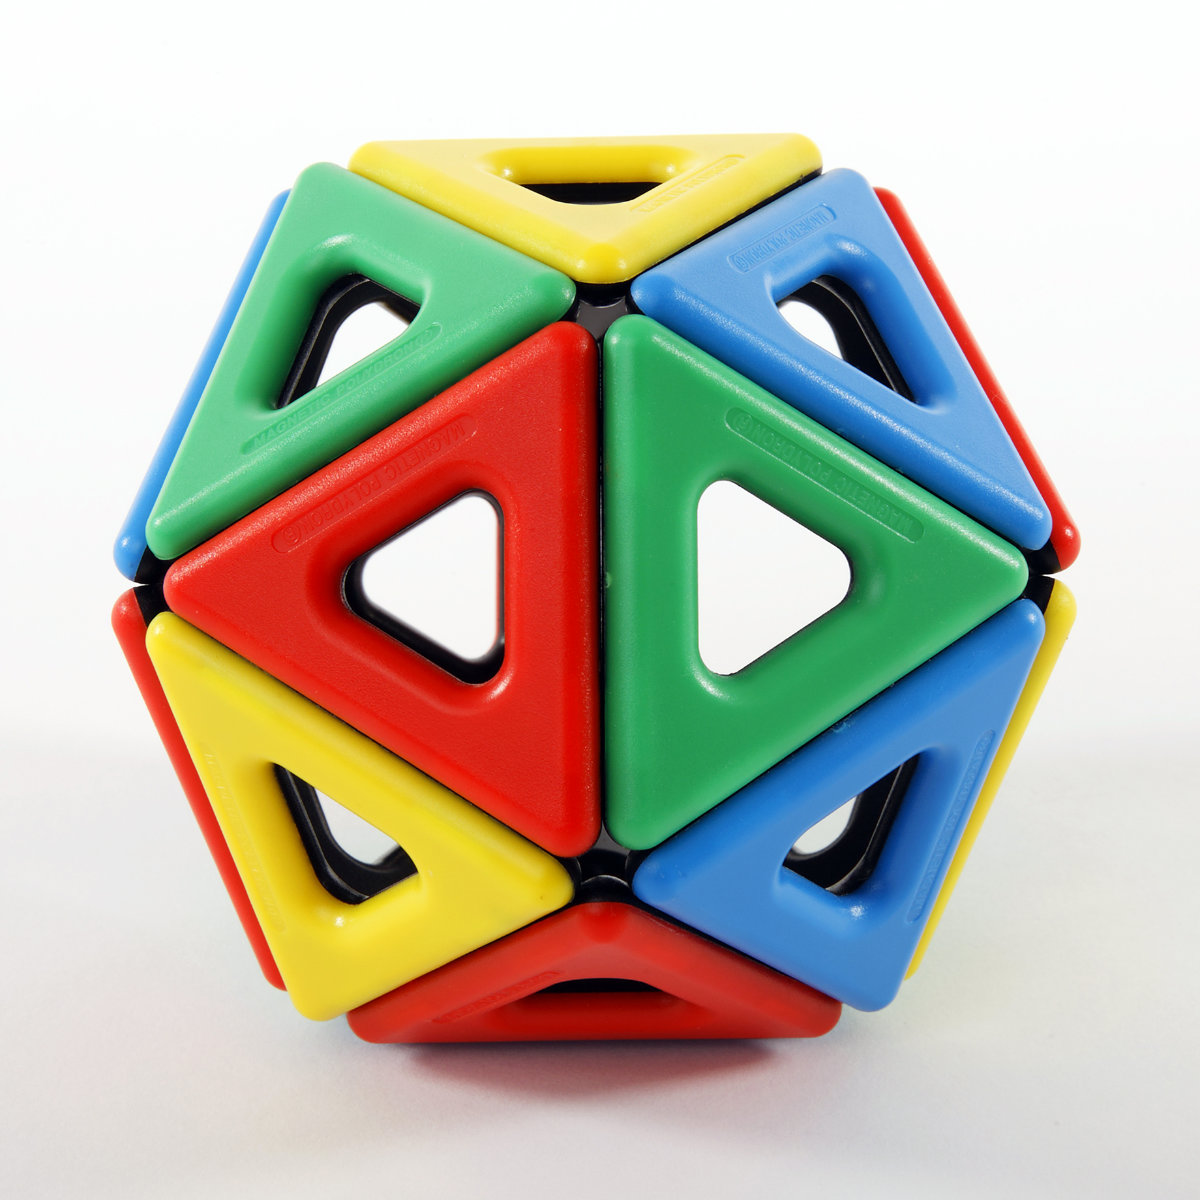 Magnetic Polydron Platonic Solids Set, Get ready to delve into the fascinating world of geometry with the Magnetic Polydron Platonic Solids Set. Designed for both young and older children, this versatile set allows students to investigate and construct the famous five platonic solids.With 50 pieces in total, including 6 squares, 32 equilateral triangles, and 12 pentagons, this set provides endless opportunities for building and exploration. Young learners can begin by creating basic shapes and gradually pro